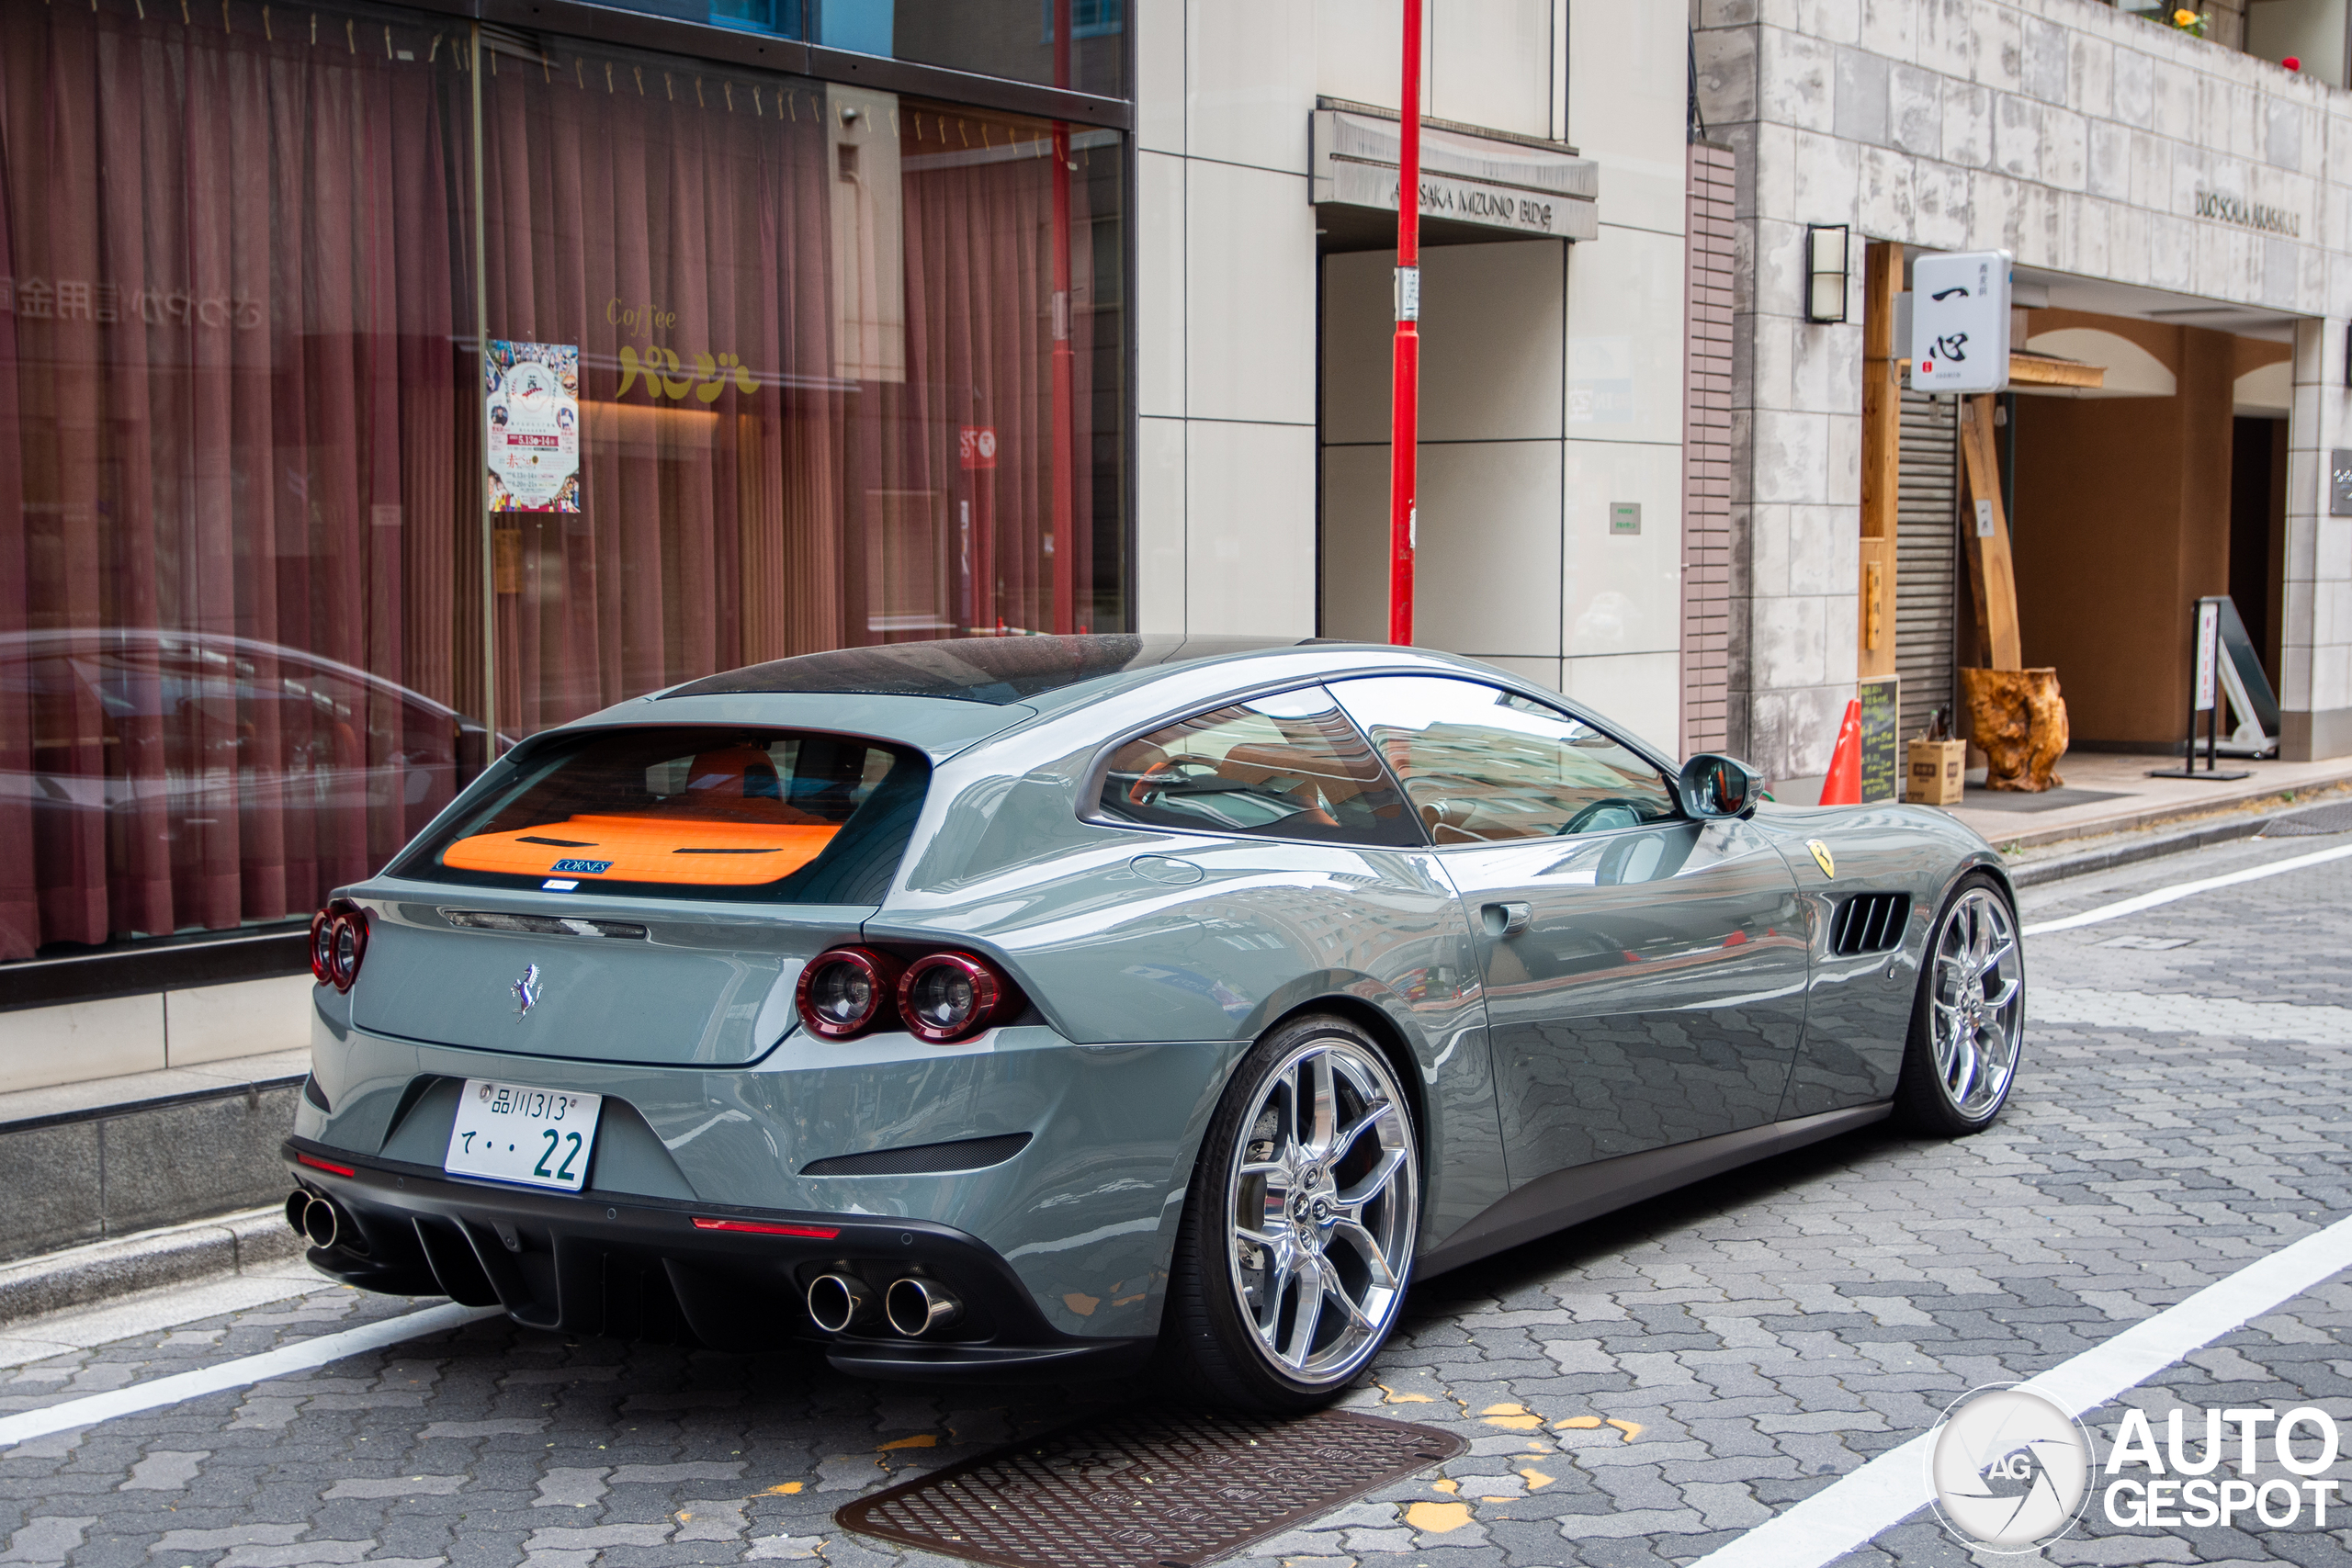 This GTC4 Lusso is Perfect